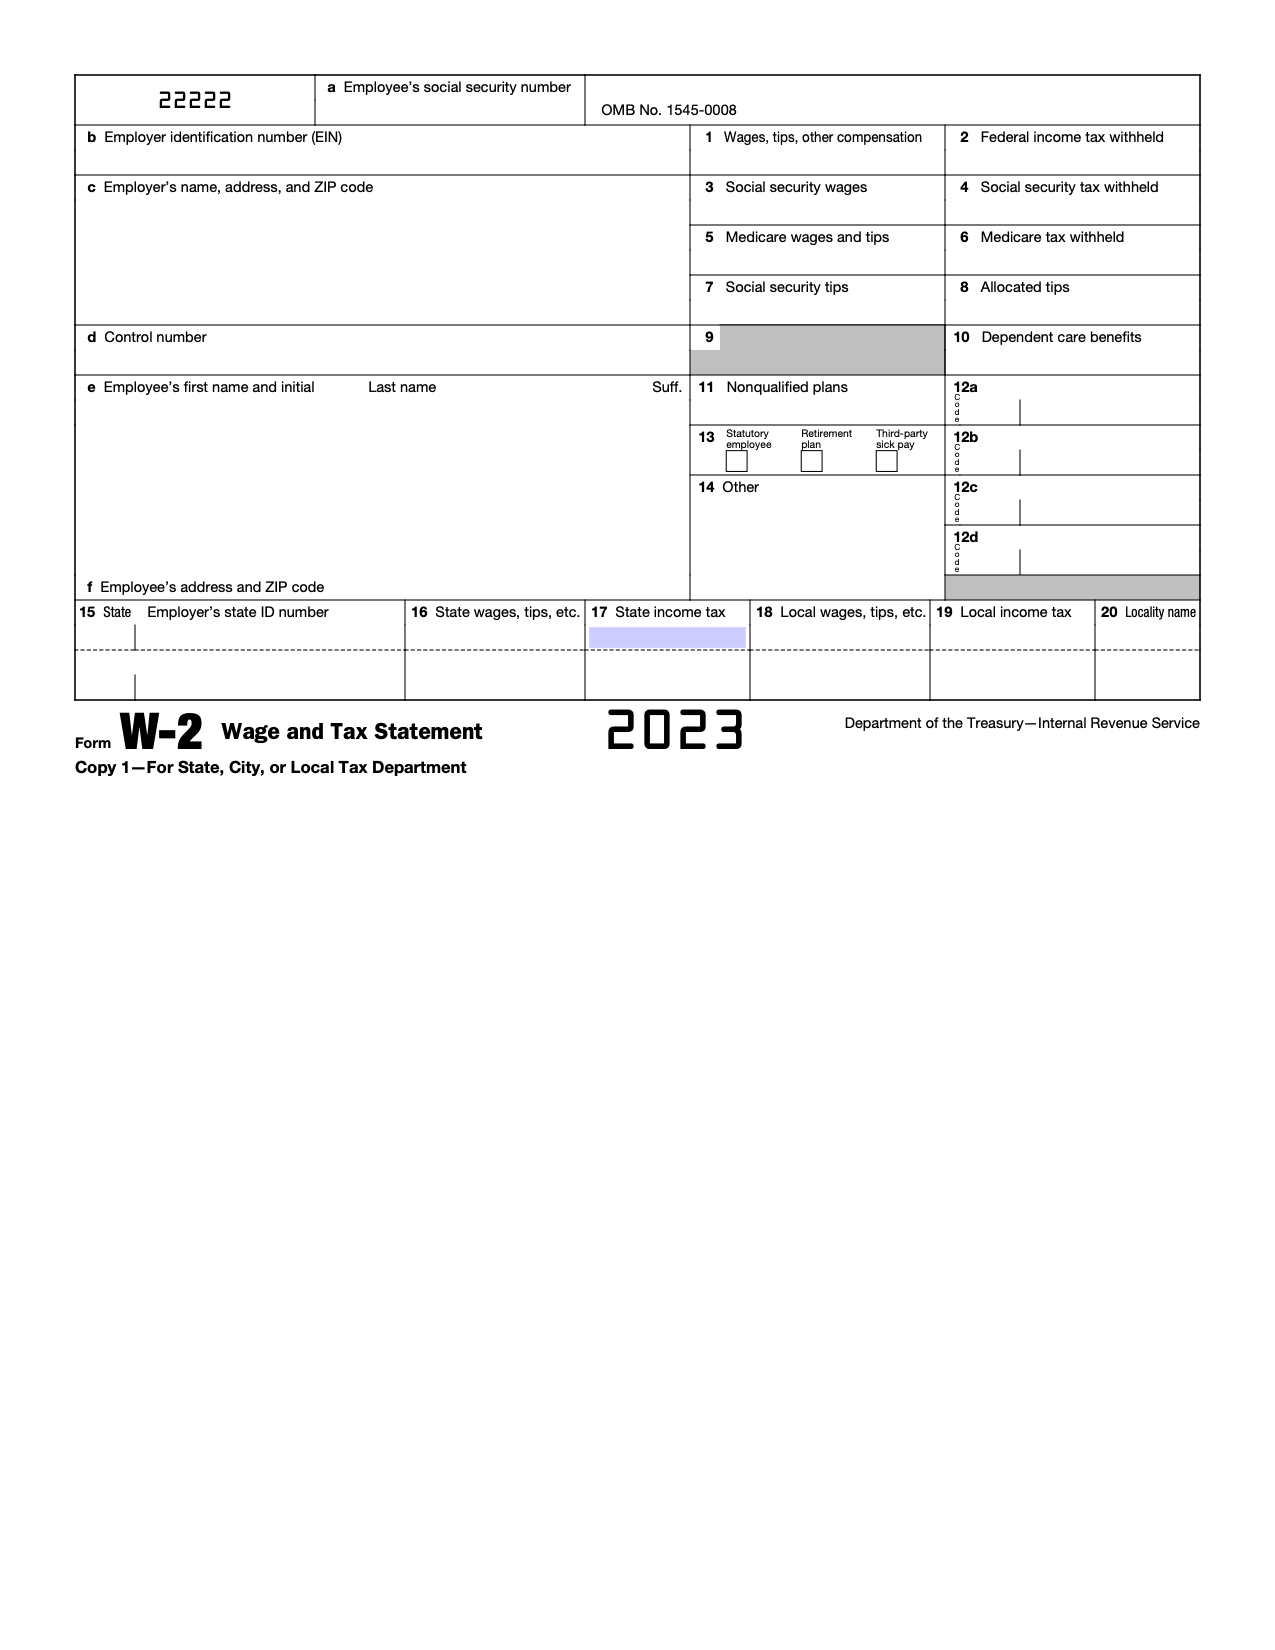 Free Irs Form W-2 | Wage And Tax Statement - Pdf – Eforms for Printable W2 Form